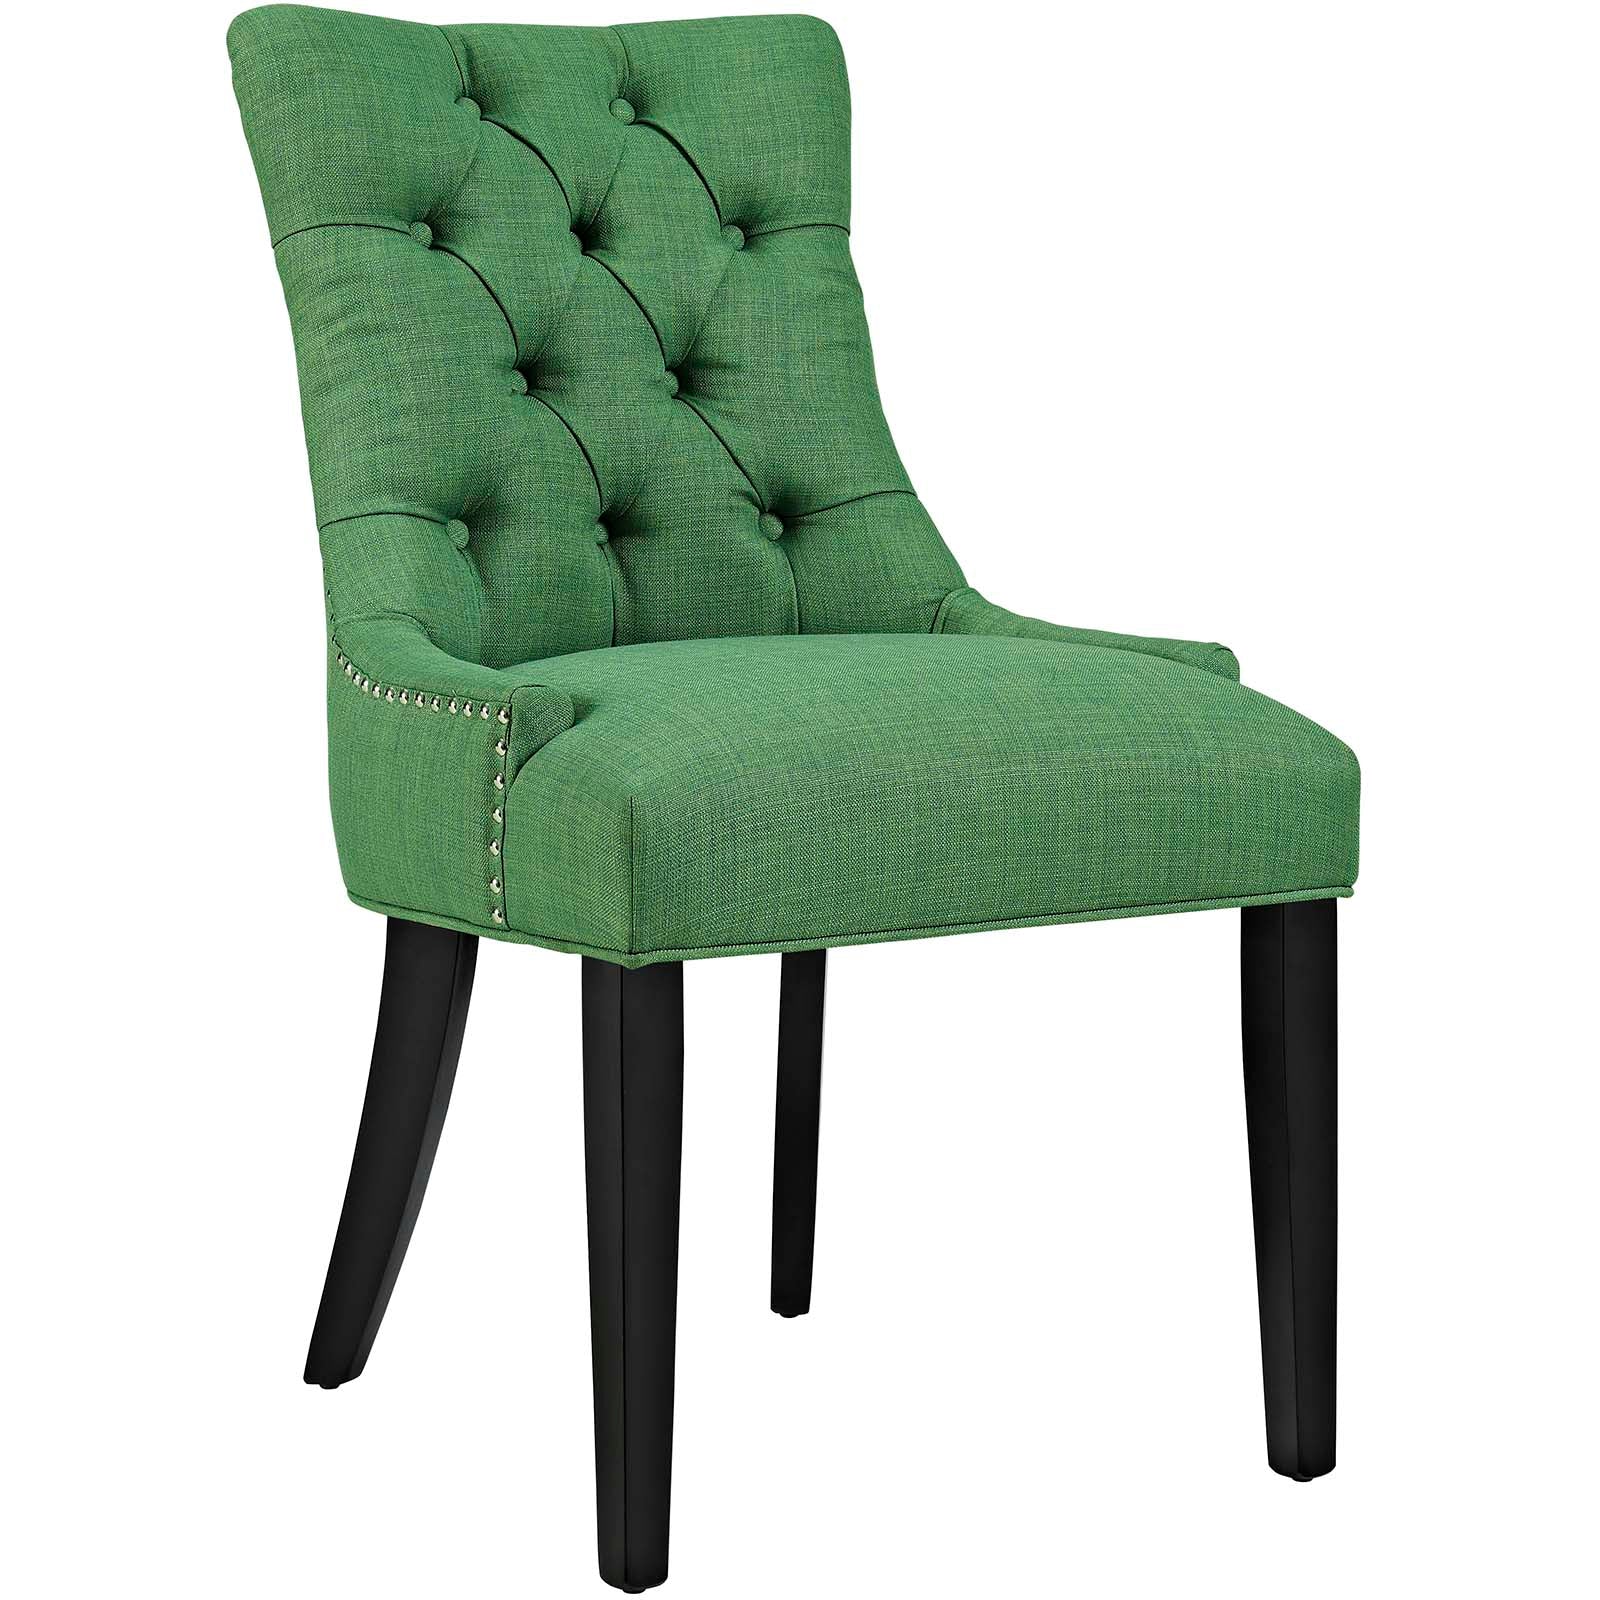 Modway Dining Chairs - Regent Tufted Fabric Dining Side Chair Kelly Green